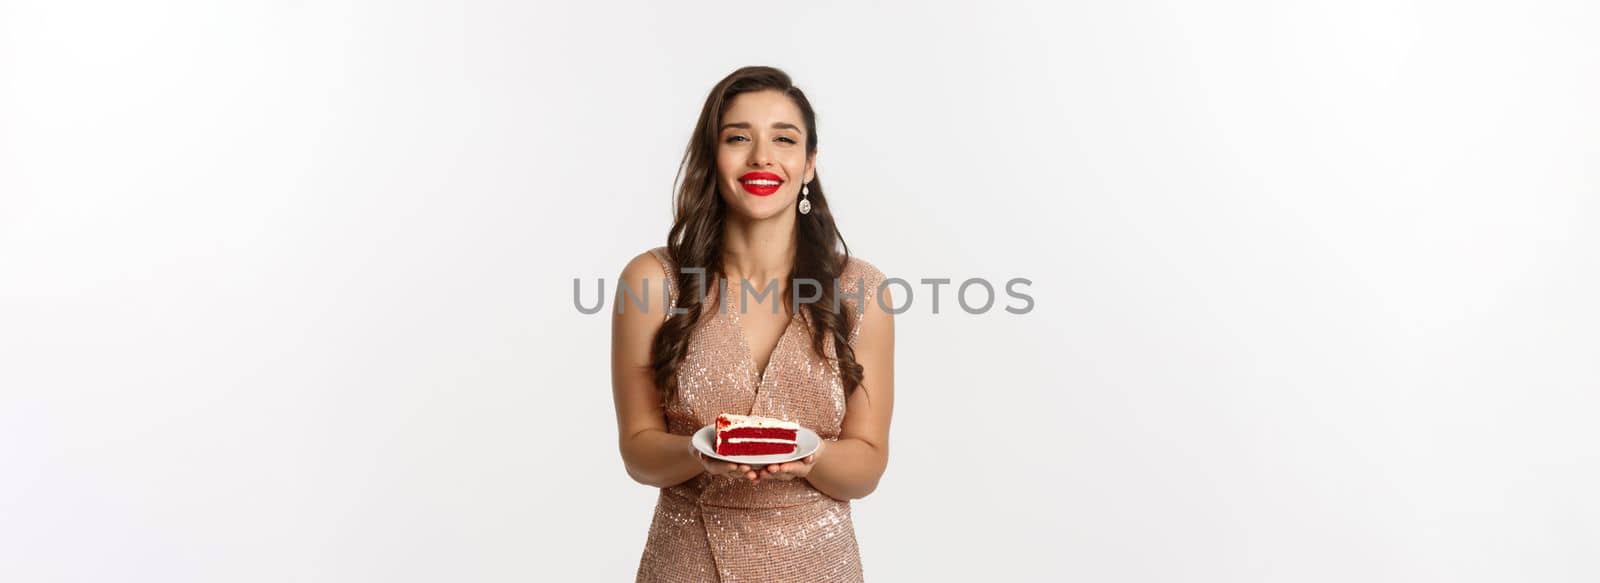 Party and celebration concept. Attractive woman in elegant dress holding delicious cake and smiling with temptation, standing over white background.